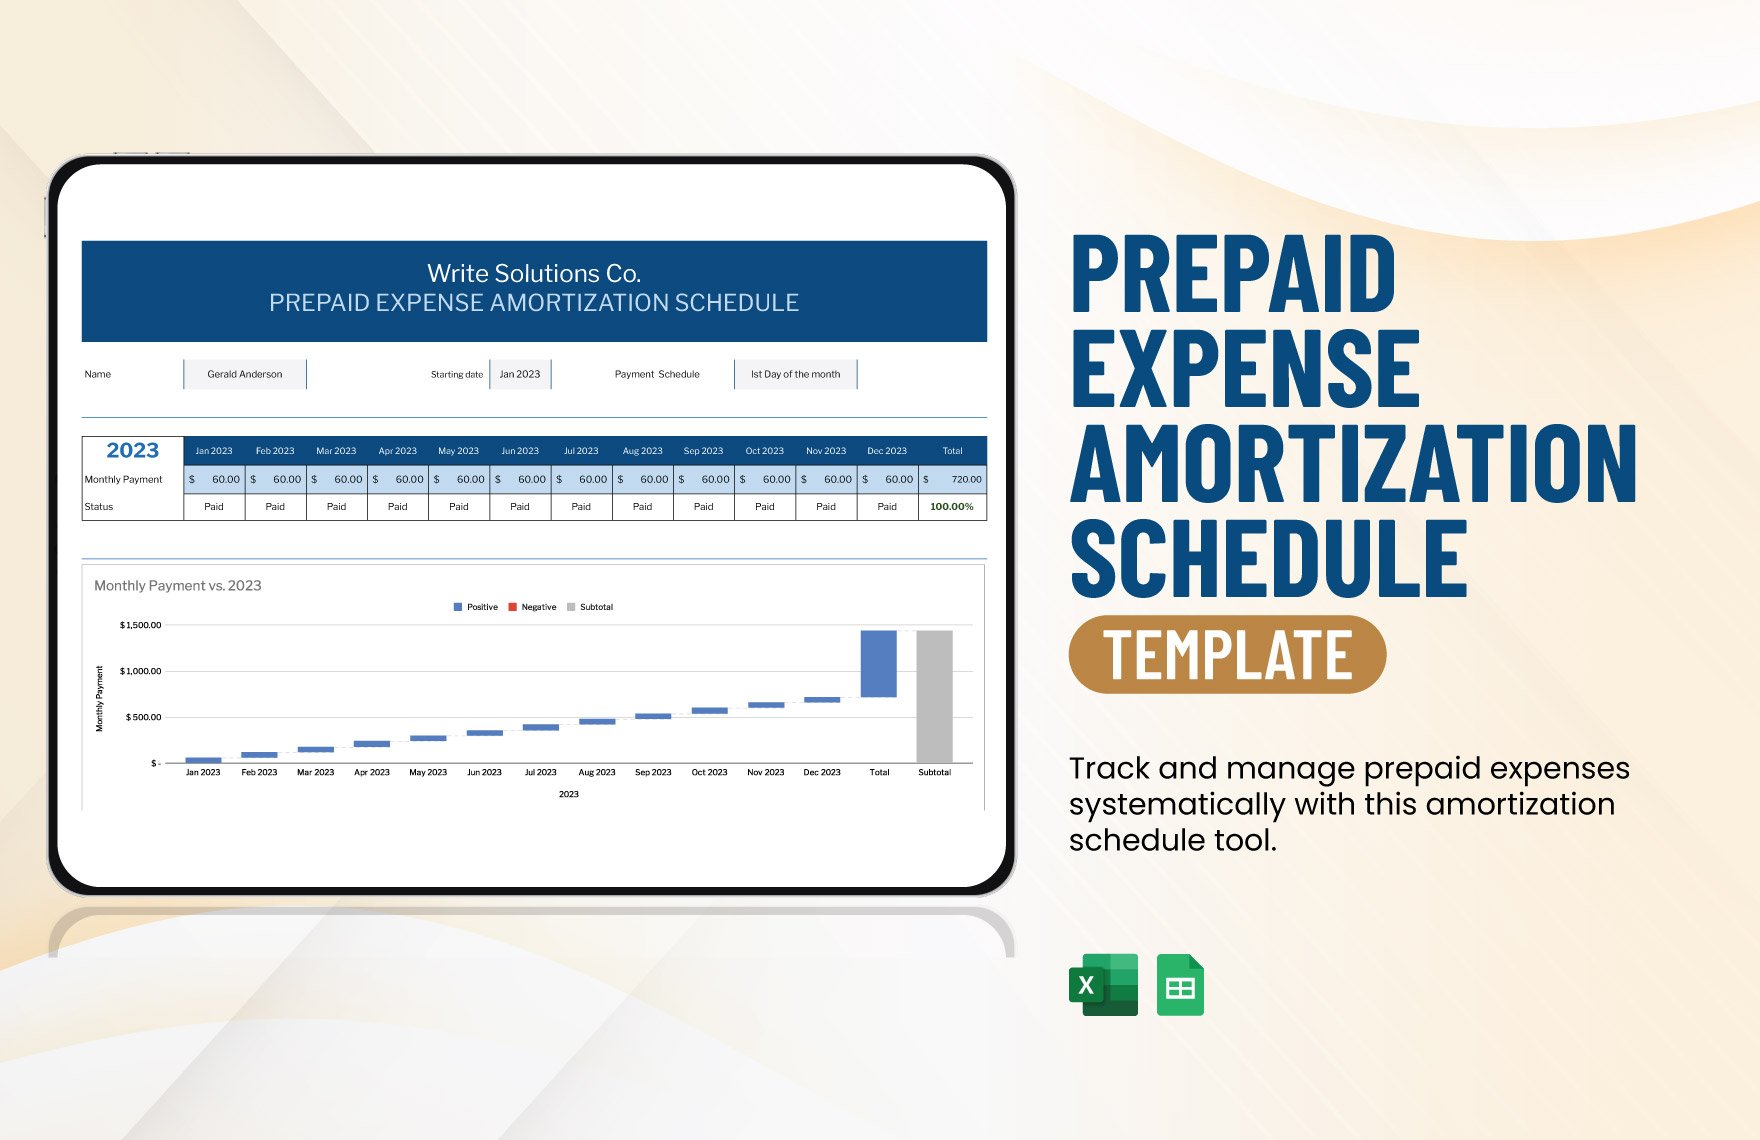 Prepaid Expense Amortization Schedule Template in Excel, Google Sheets